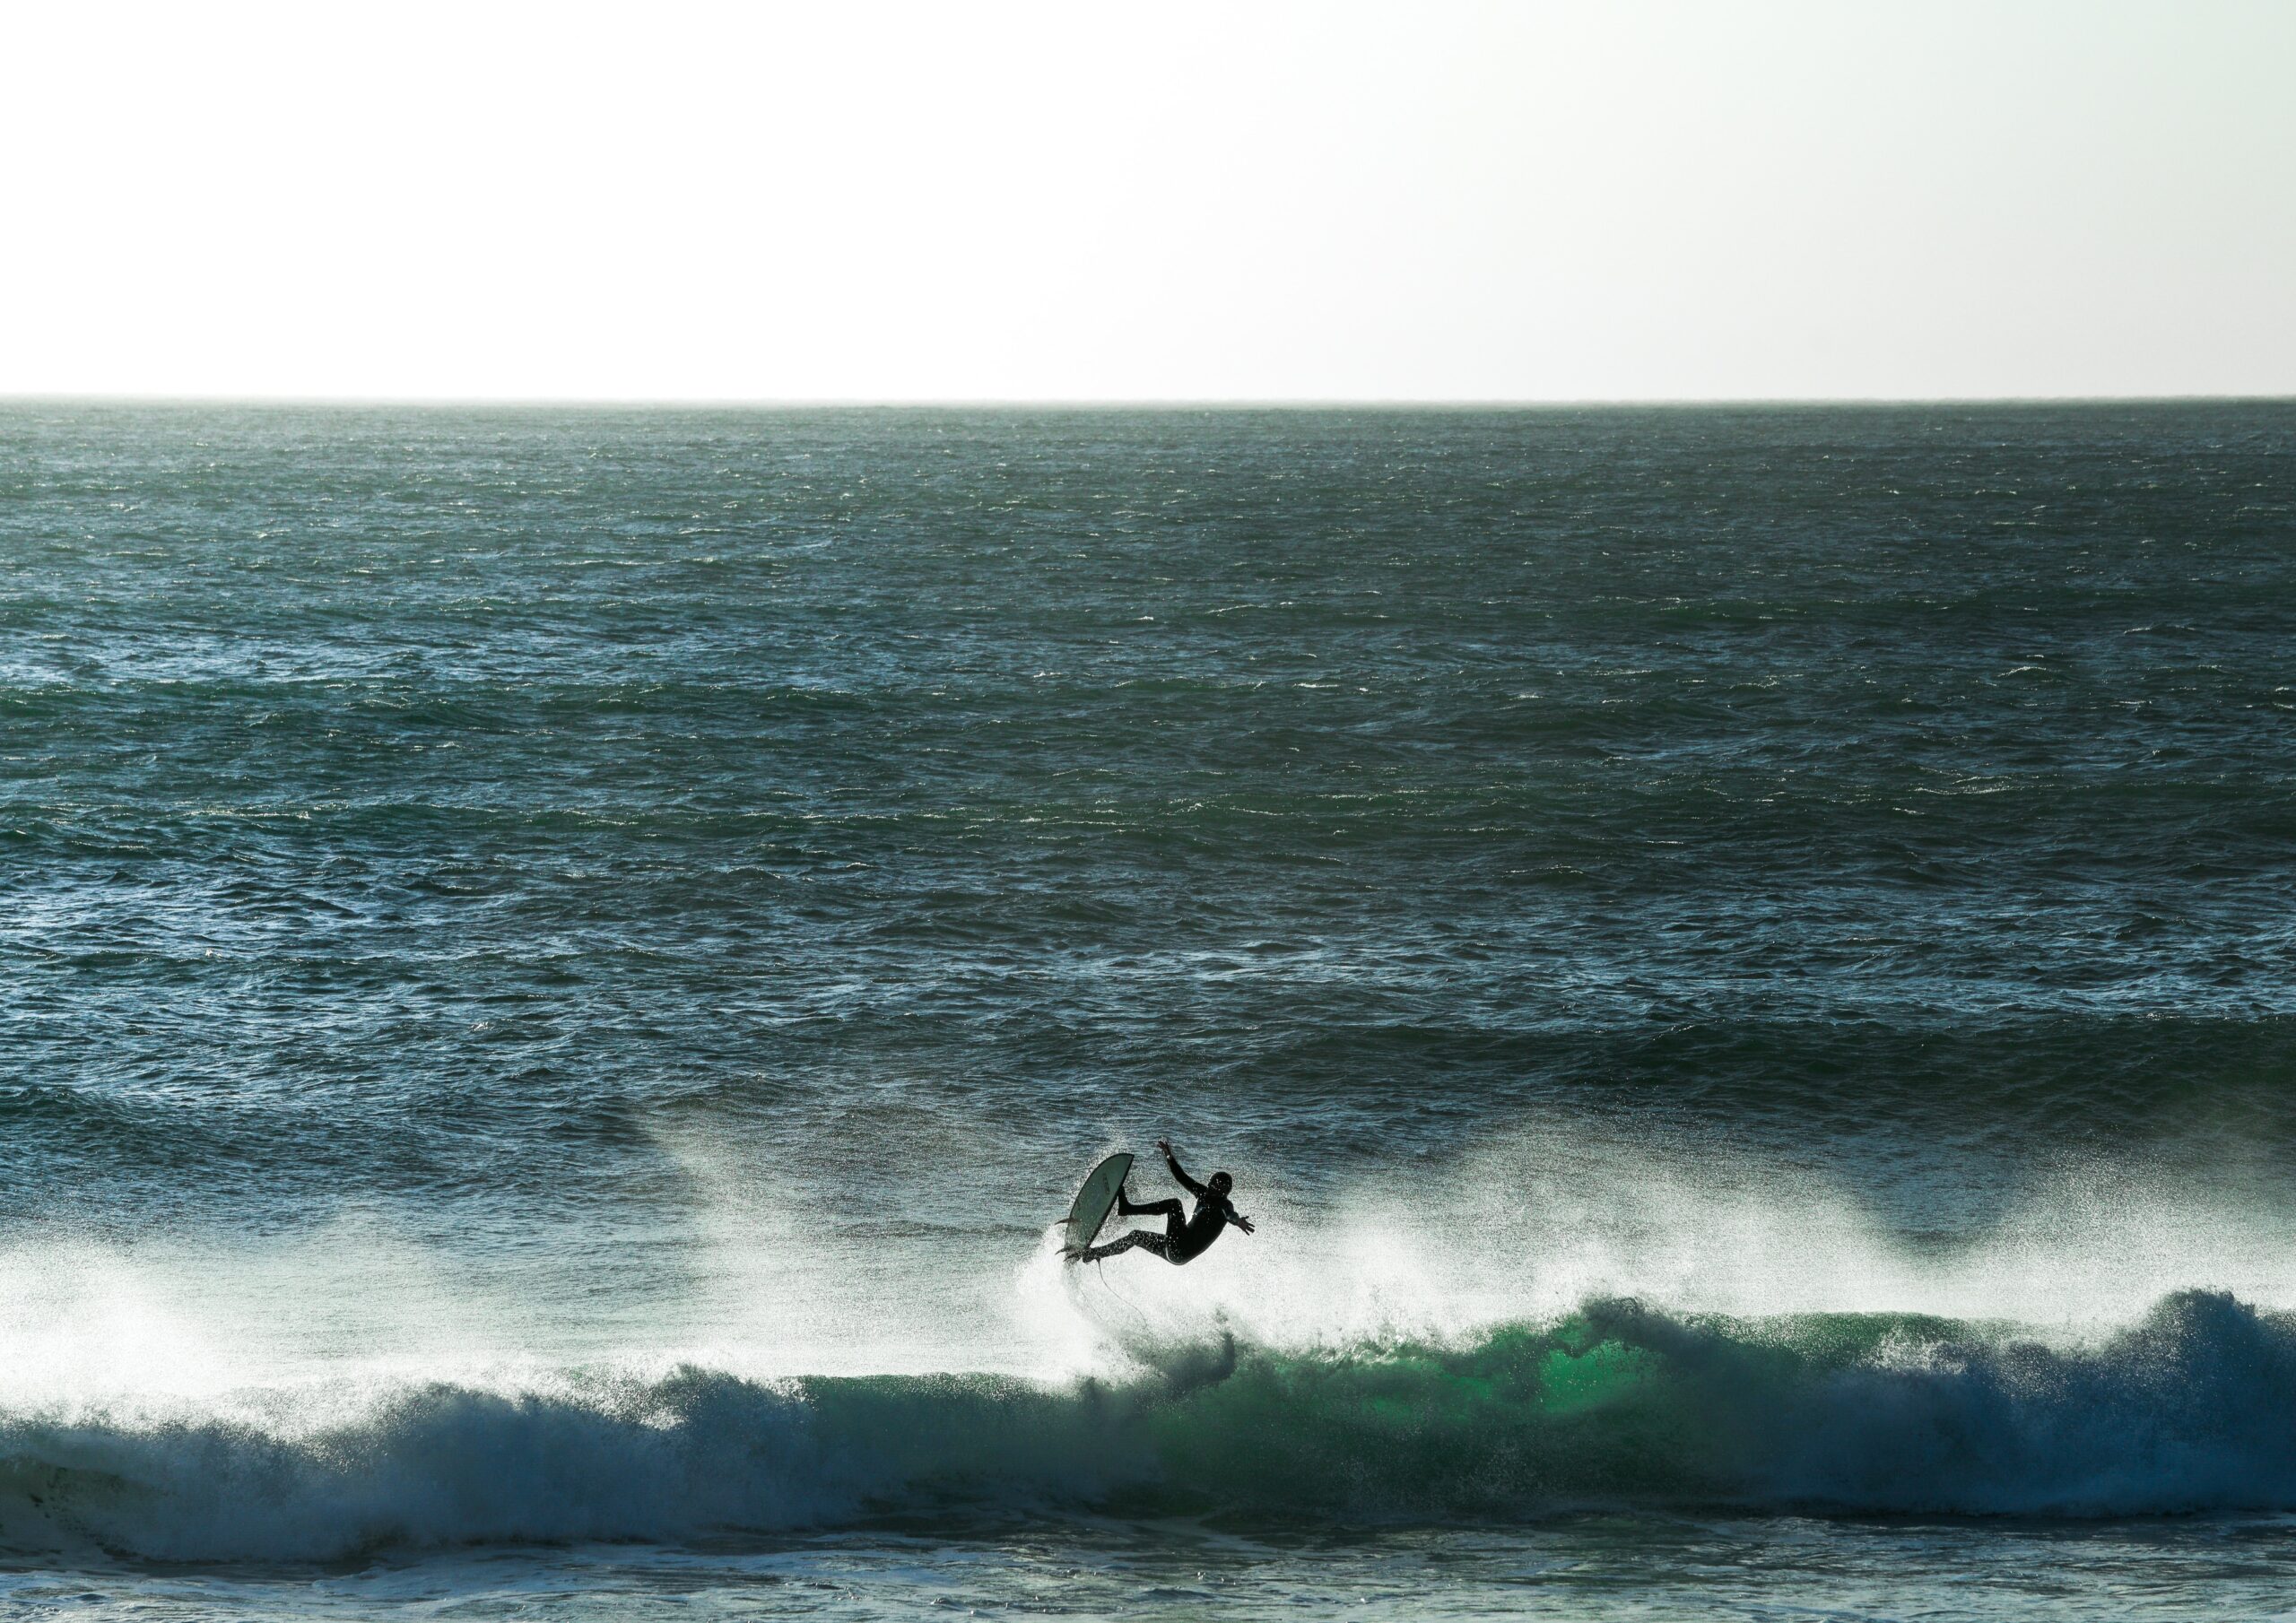 Great surf on the West Coast of the Western Cape